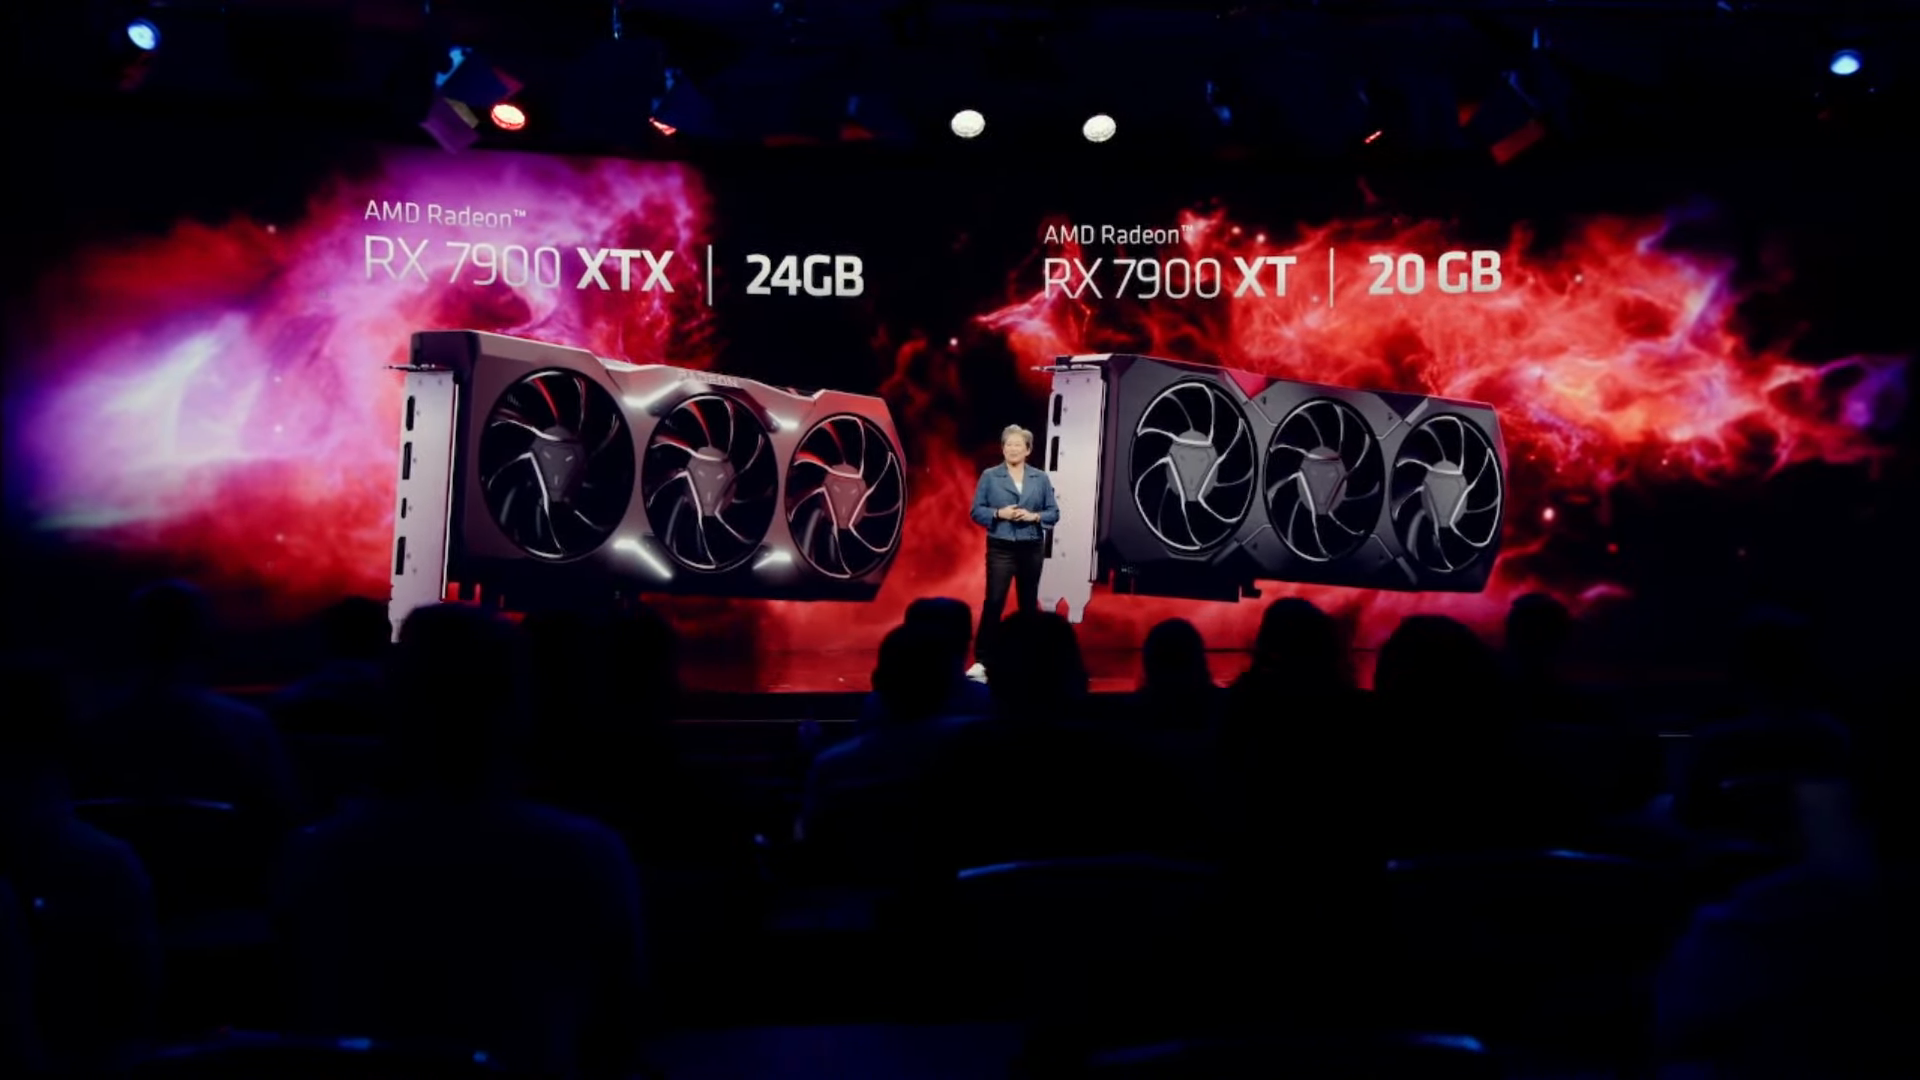 Media asset in full size related to 3dfxzone.it news item entitled as follows: AMD annuncia le Radeon RX 7900 XTX e Radeon RX 7900 XT con GPU RDNA 3 | Image Name: news33826_AMD-Radeon-RX-7900_RDNA-3_1.png